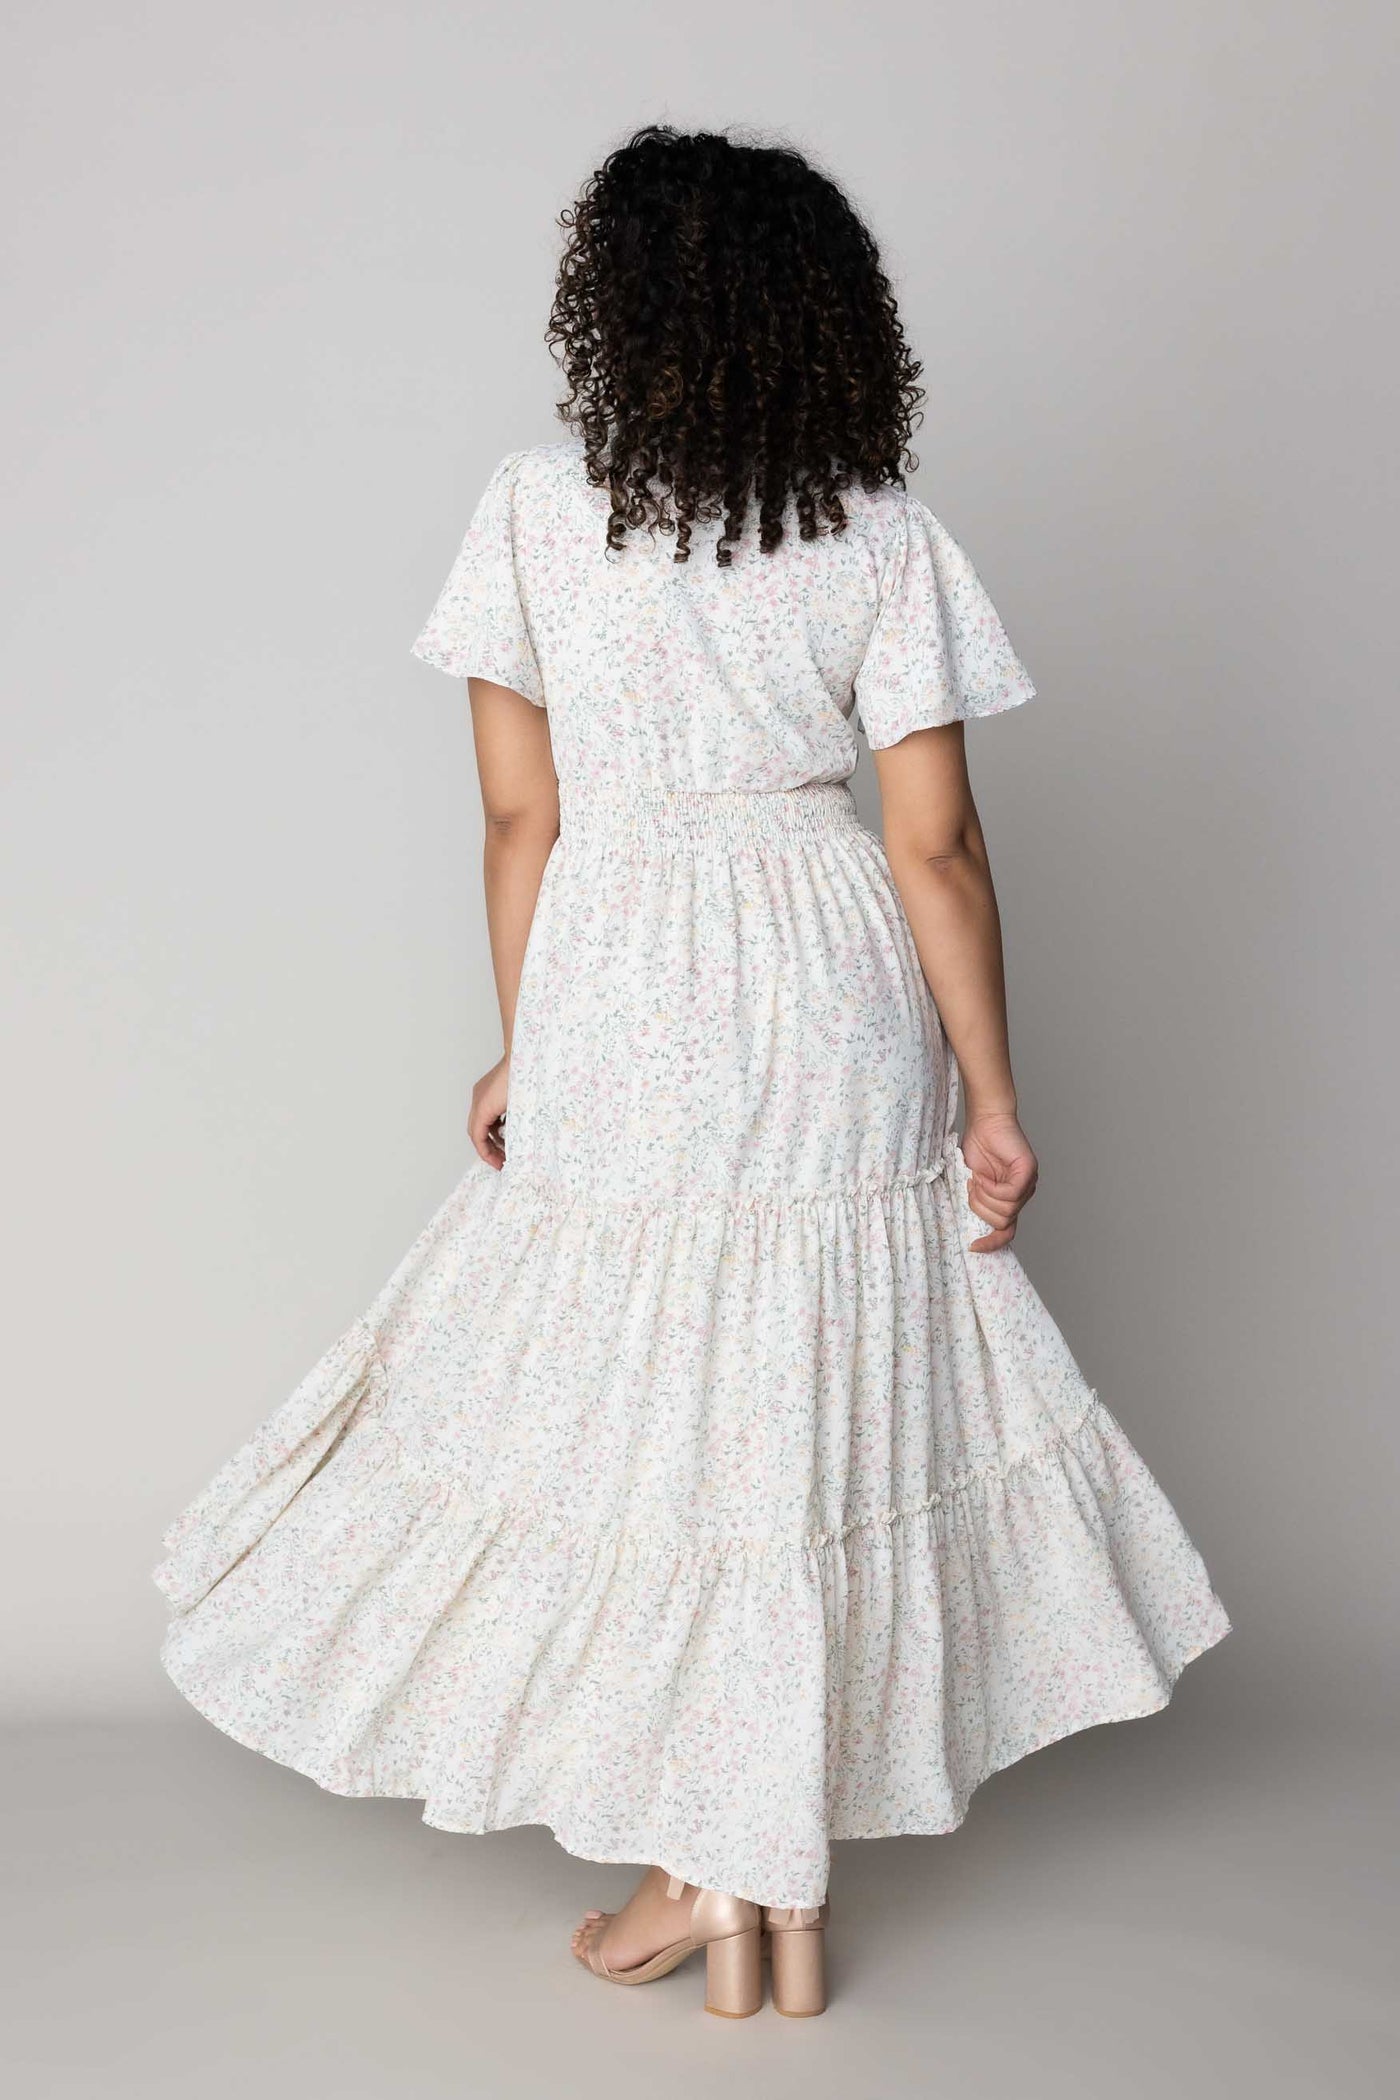 This modest dress features a defined waistband and floral details.